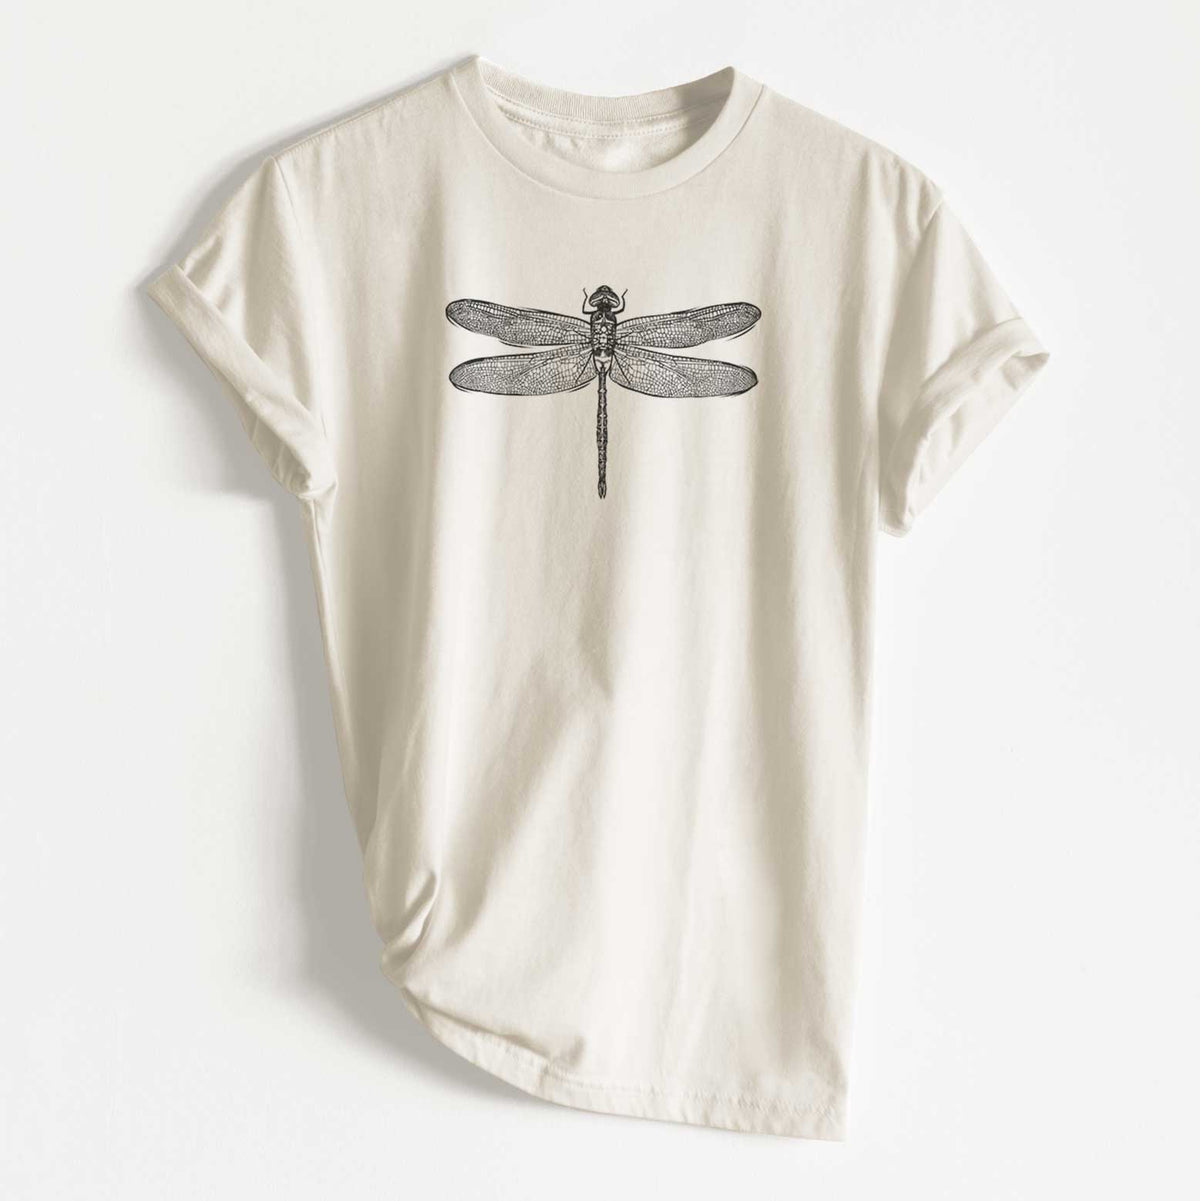 Anax Junius - Green Darner Dragonfly - Unisex Recycled Eco Tee  - CLOSEOUT - FINAL SALE